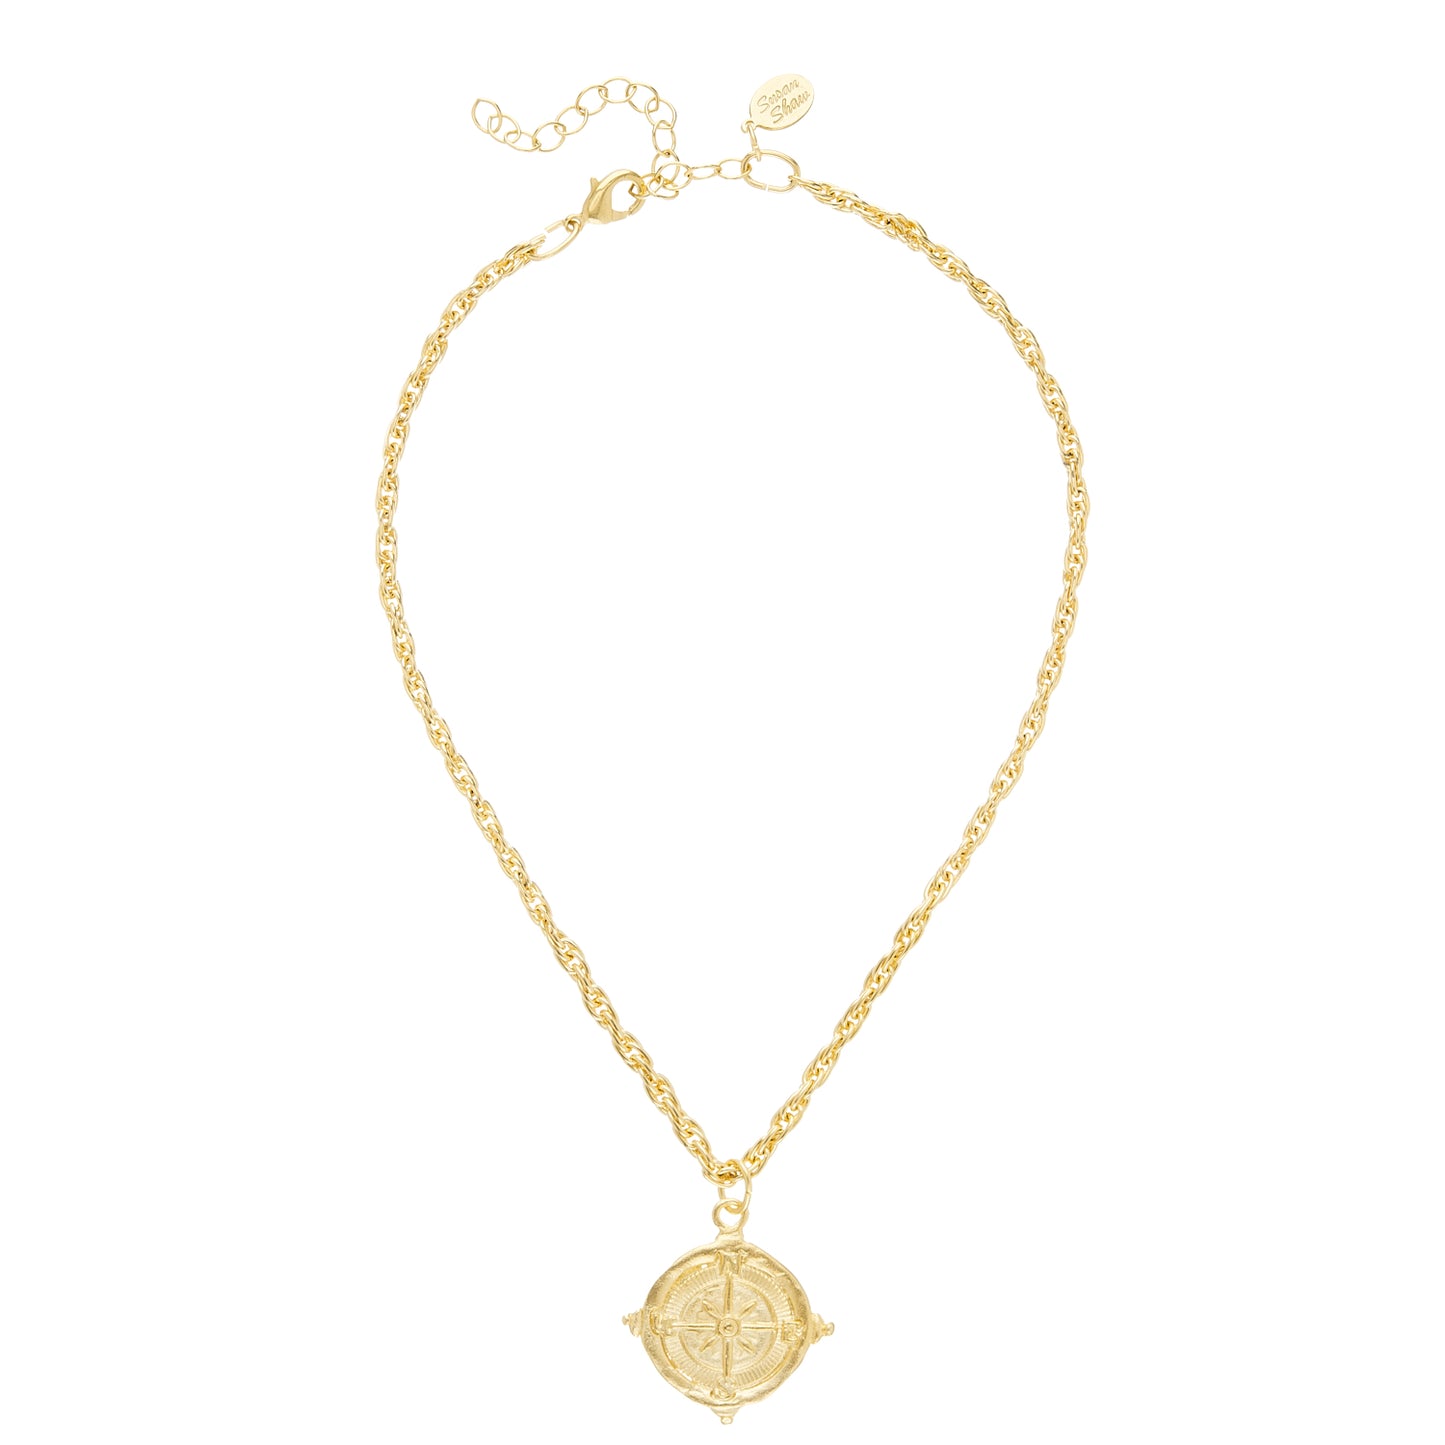 Get ready to lose yourself in the charm of the Gold Compass Necklace by Susan Shaw. With its triple plated 24k gold and a versatile length of 16" with a 3" extender, this necklace will guide you towards stylish adventures!